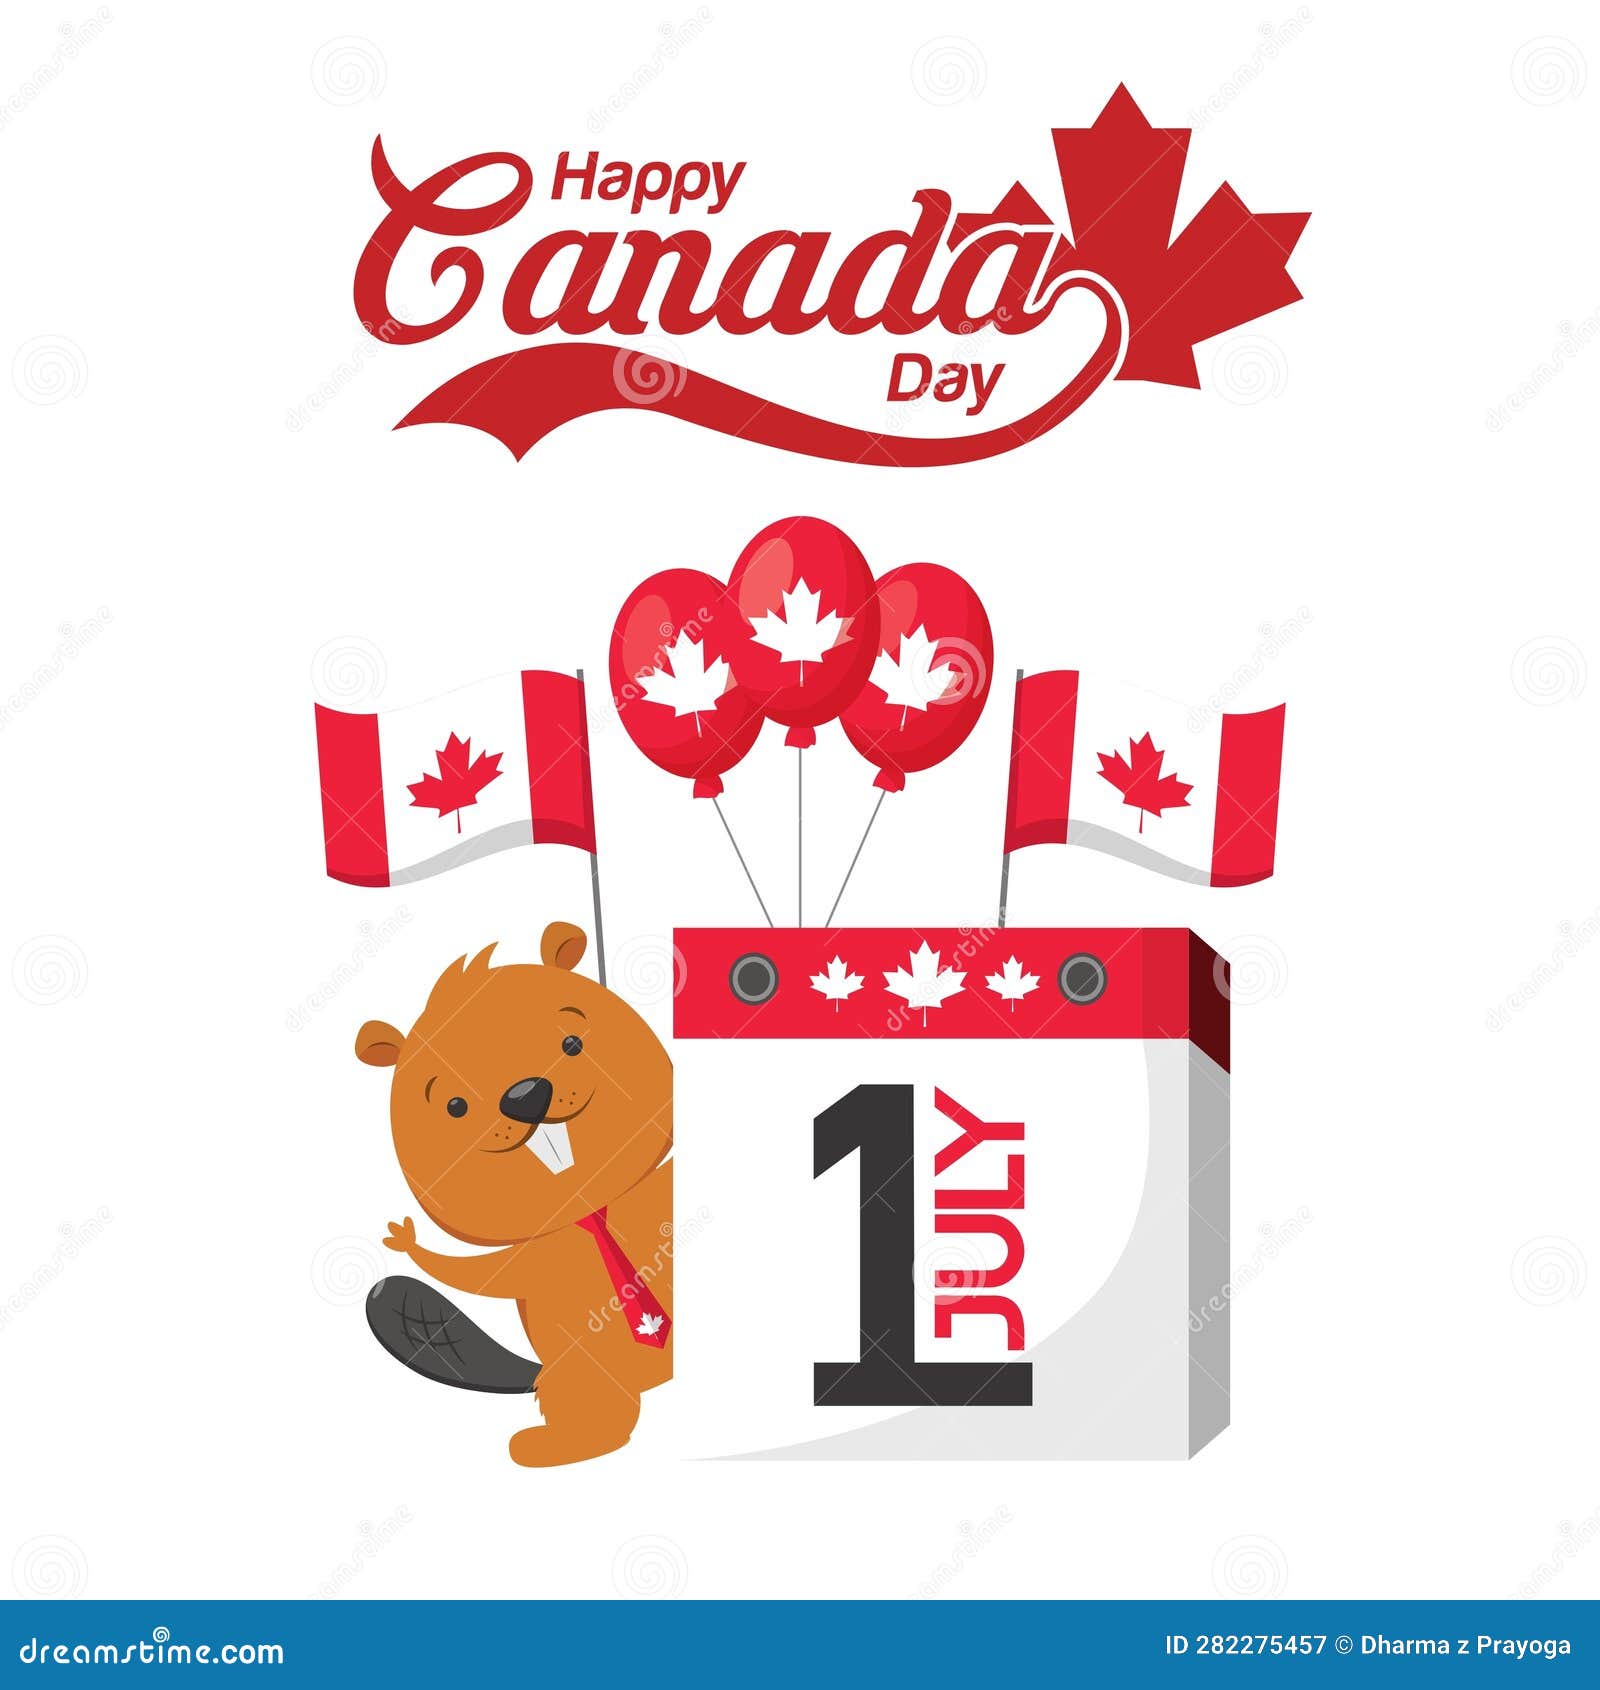 july 1st commemorates canada day